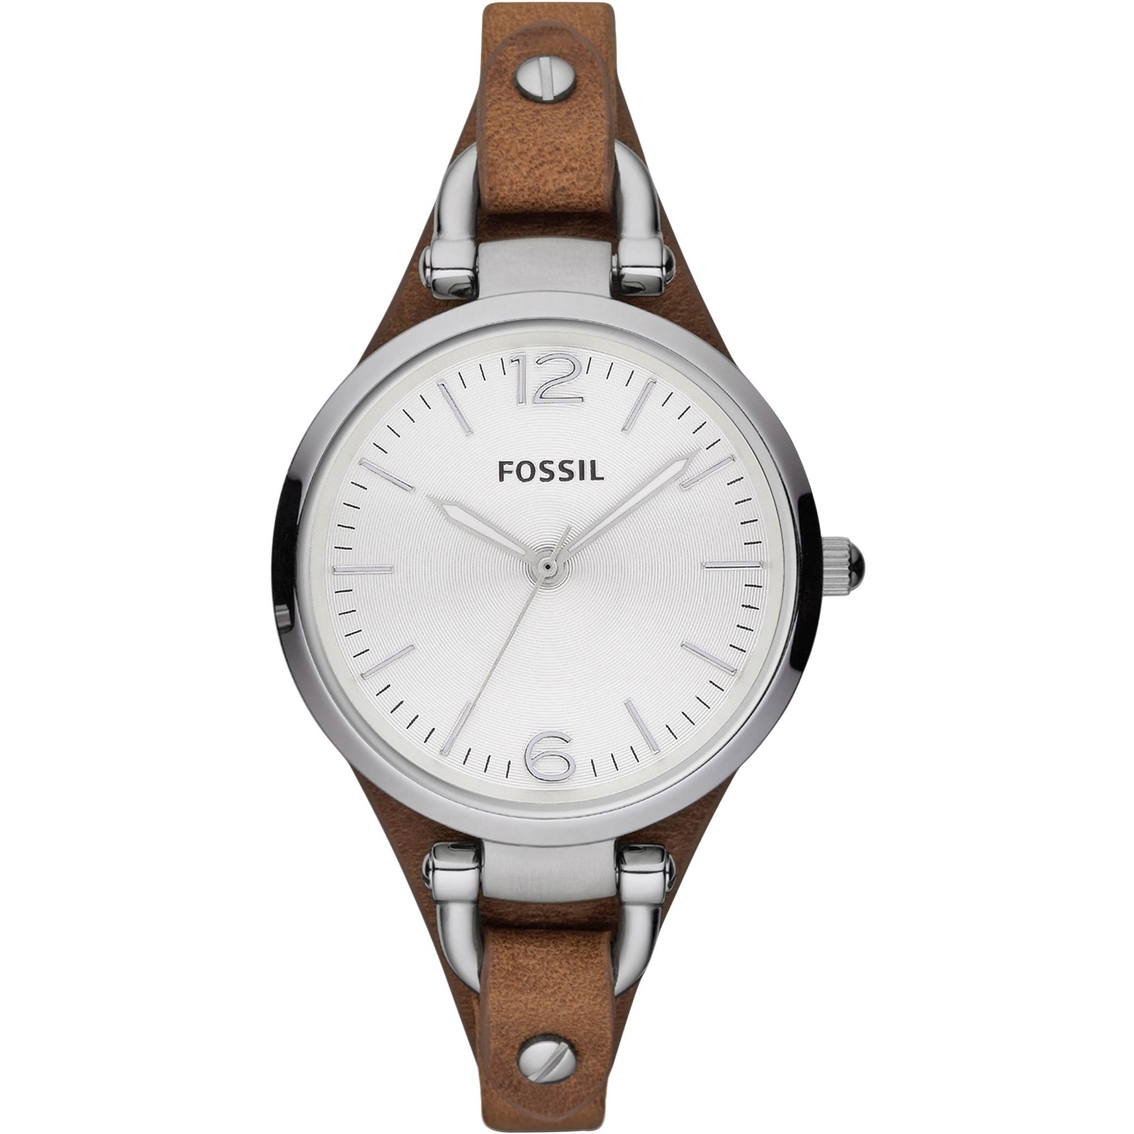 Fossil Women's Vintage Georgia Watch With Leather Strap 32mm Es3060 ...